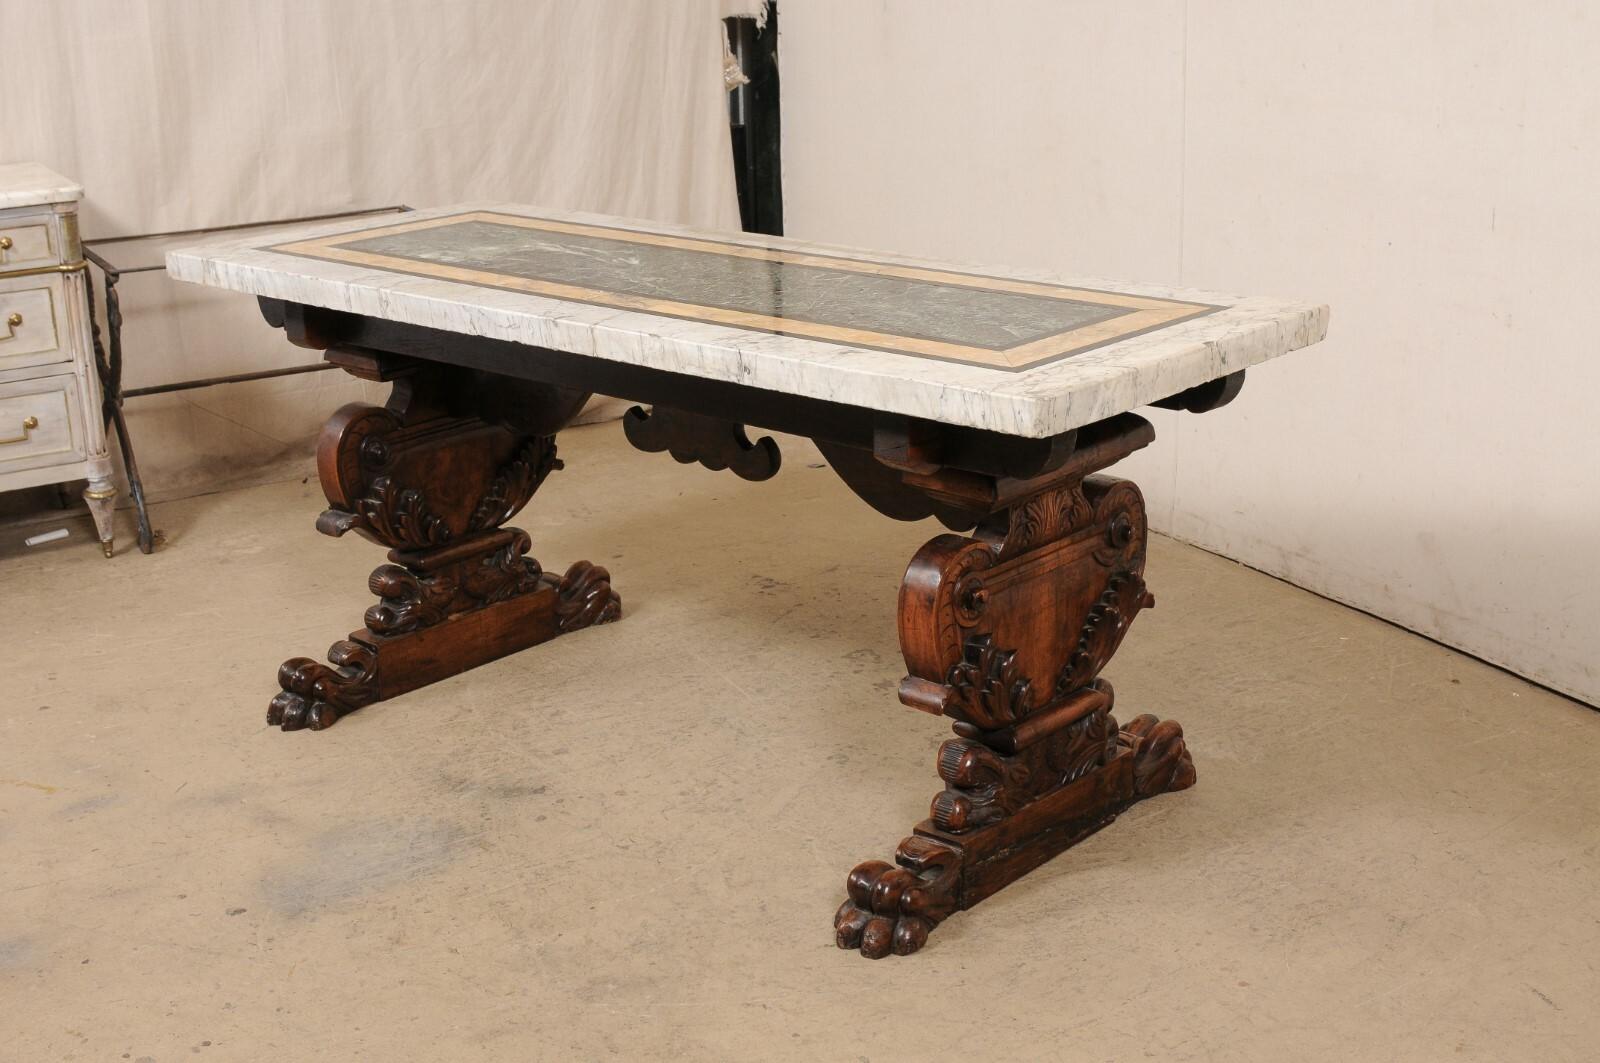 A Gorgeous 18th C Italian Inlaid Marble Top Table w/Robustly Carved Trestle Legs For Sale 4